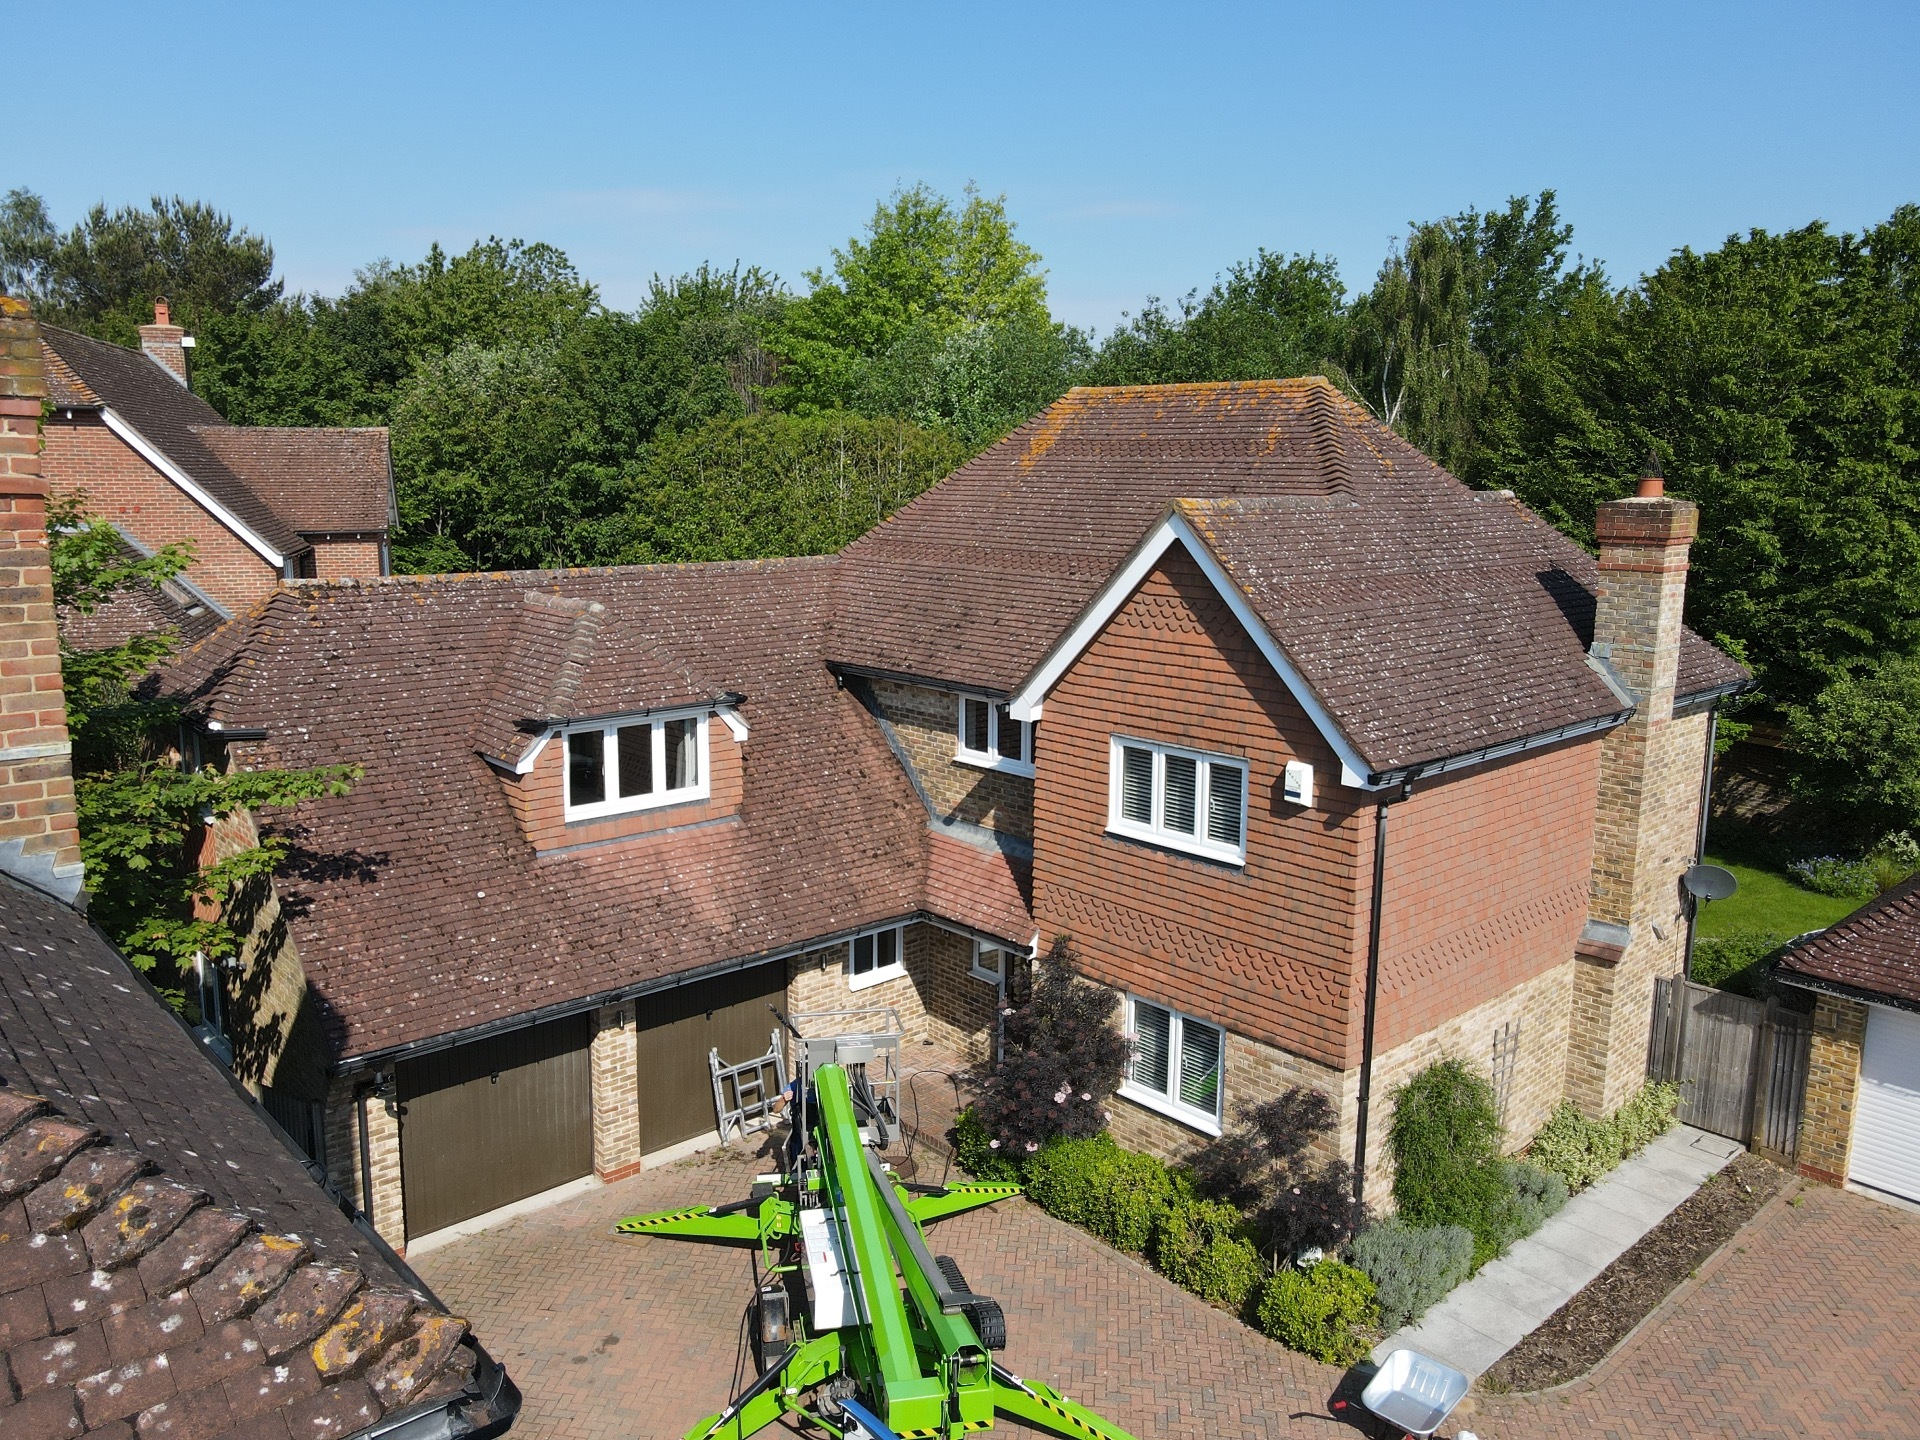 Example of a roof being cleaned in Kent by ProTeam Cleaning